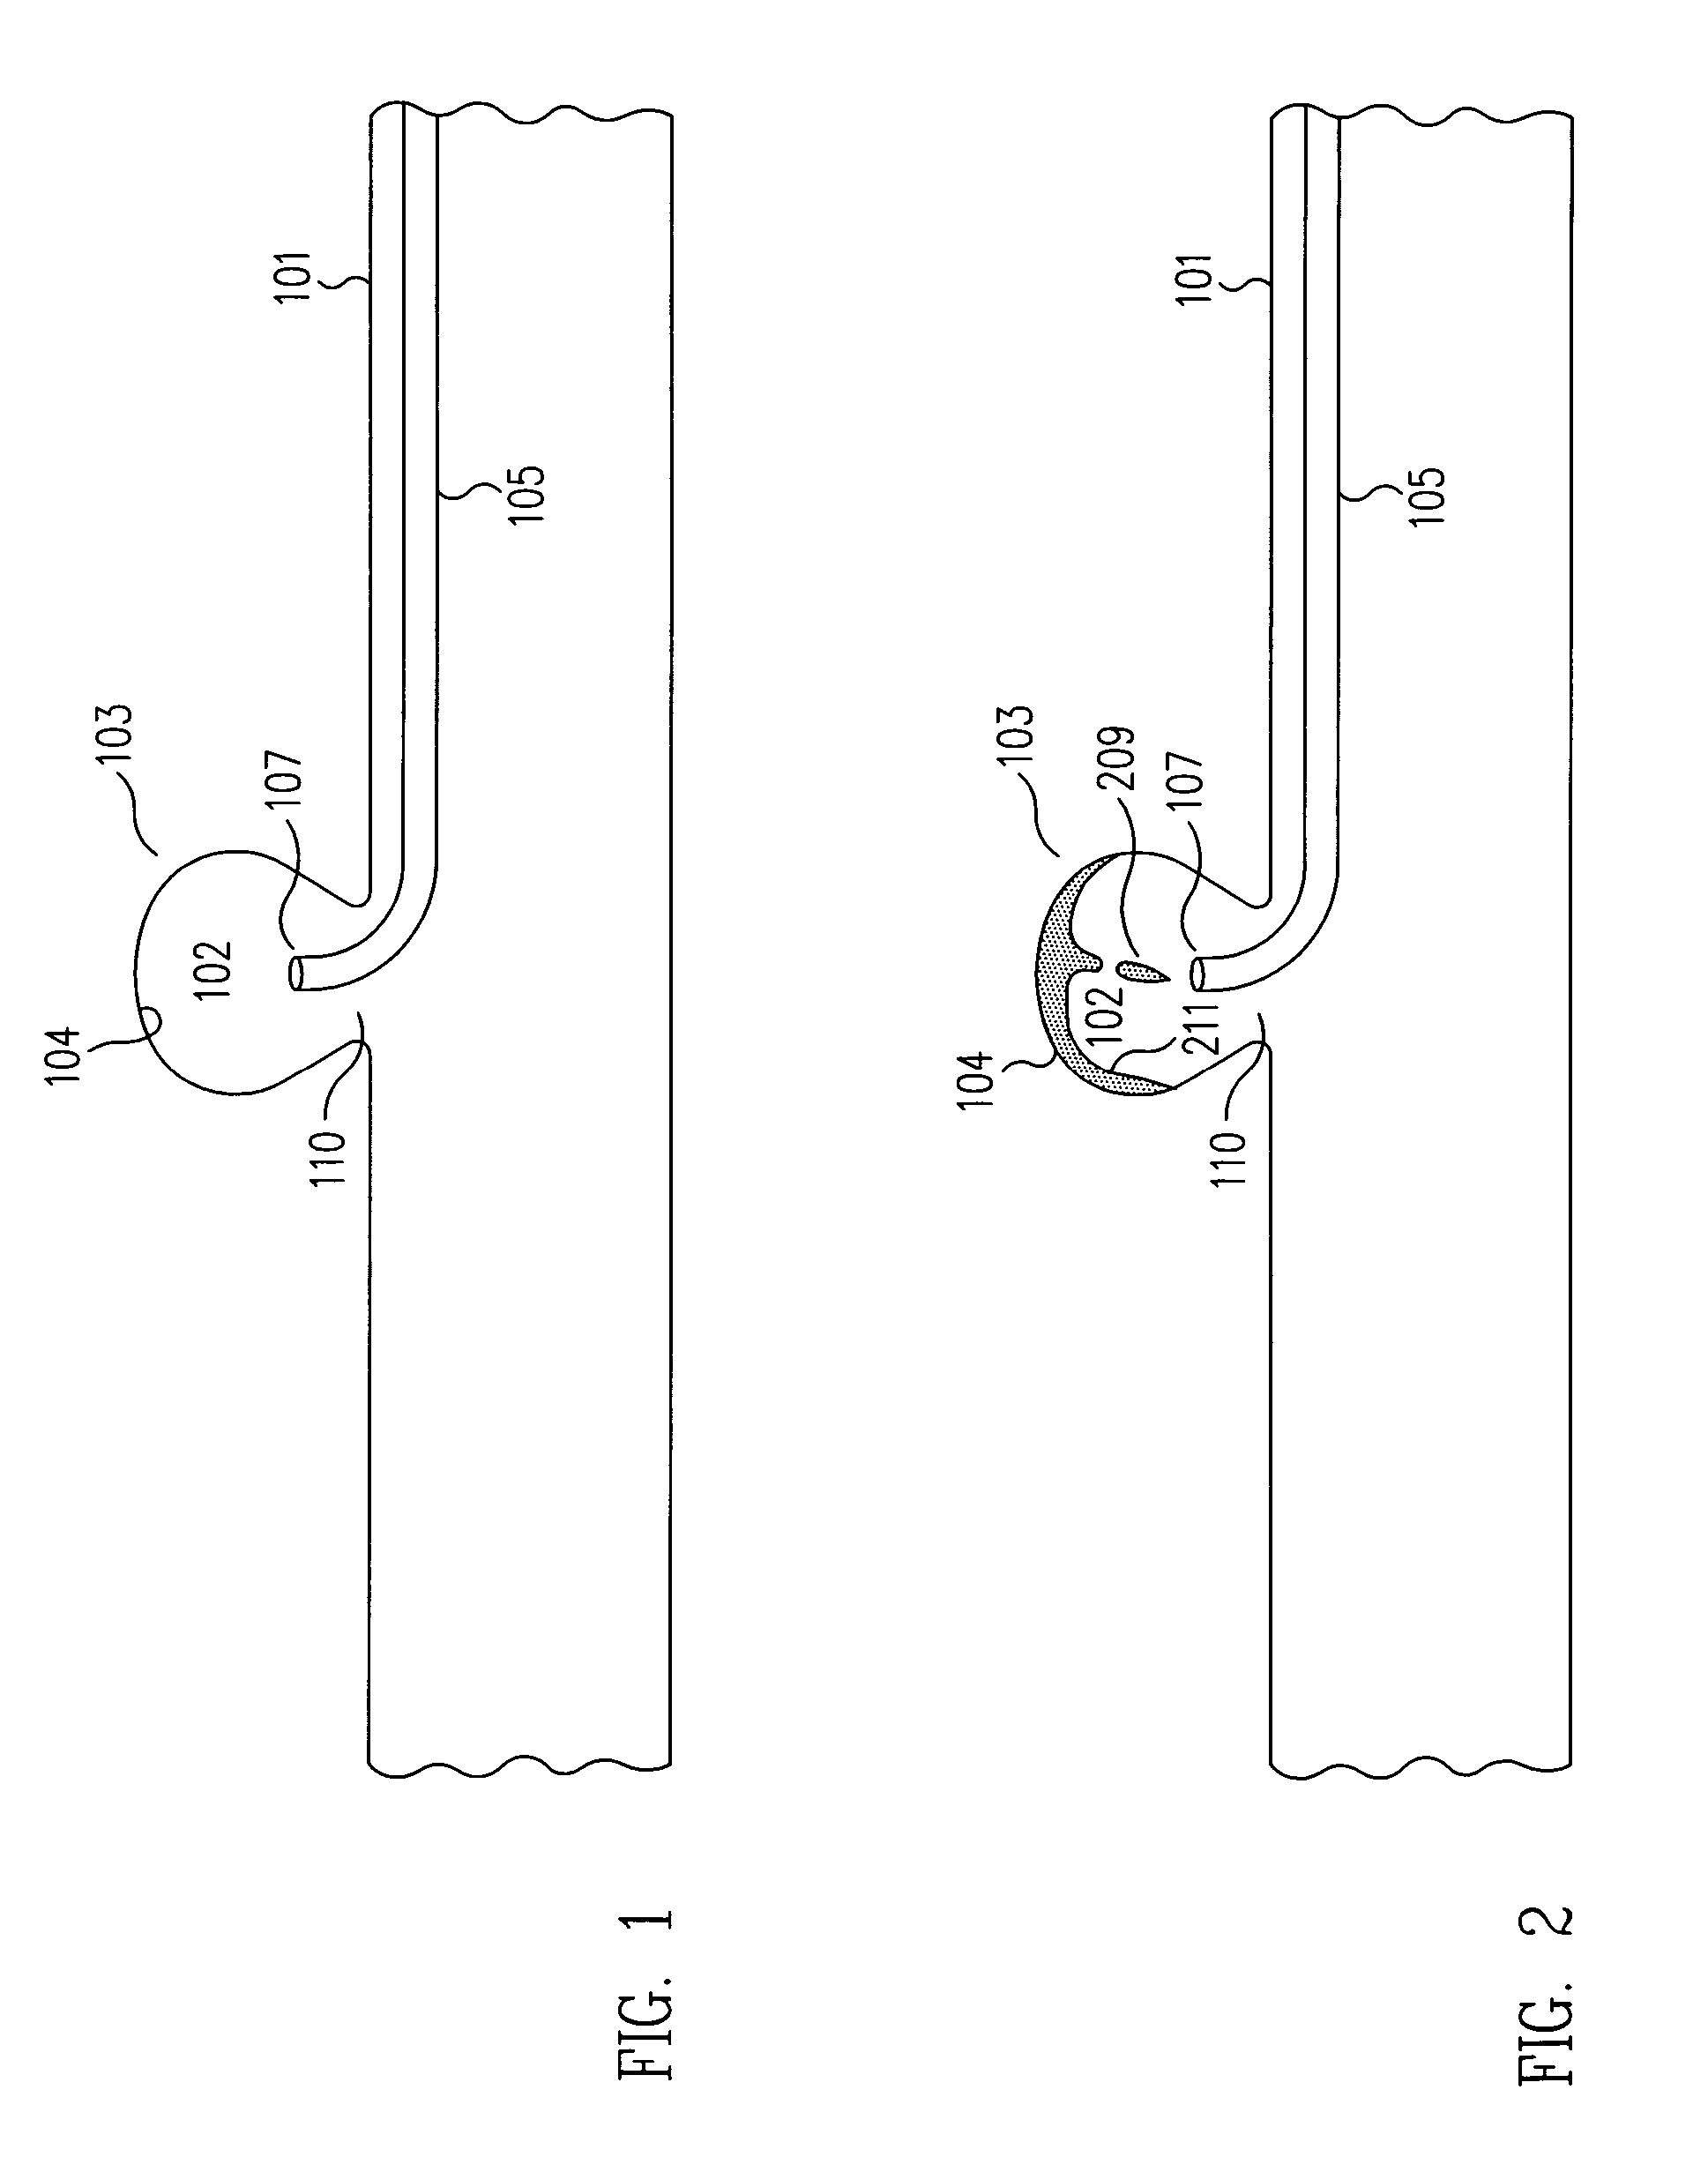 Method and apparatus for aneurismal treatment